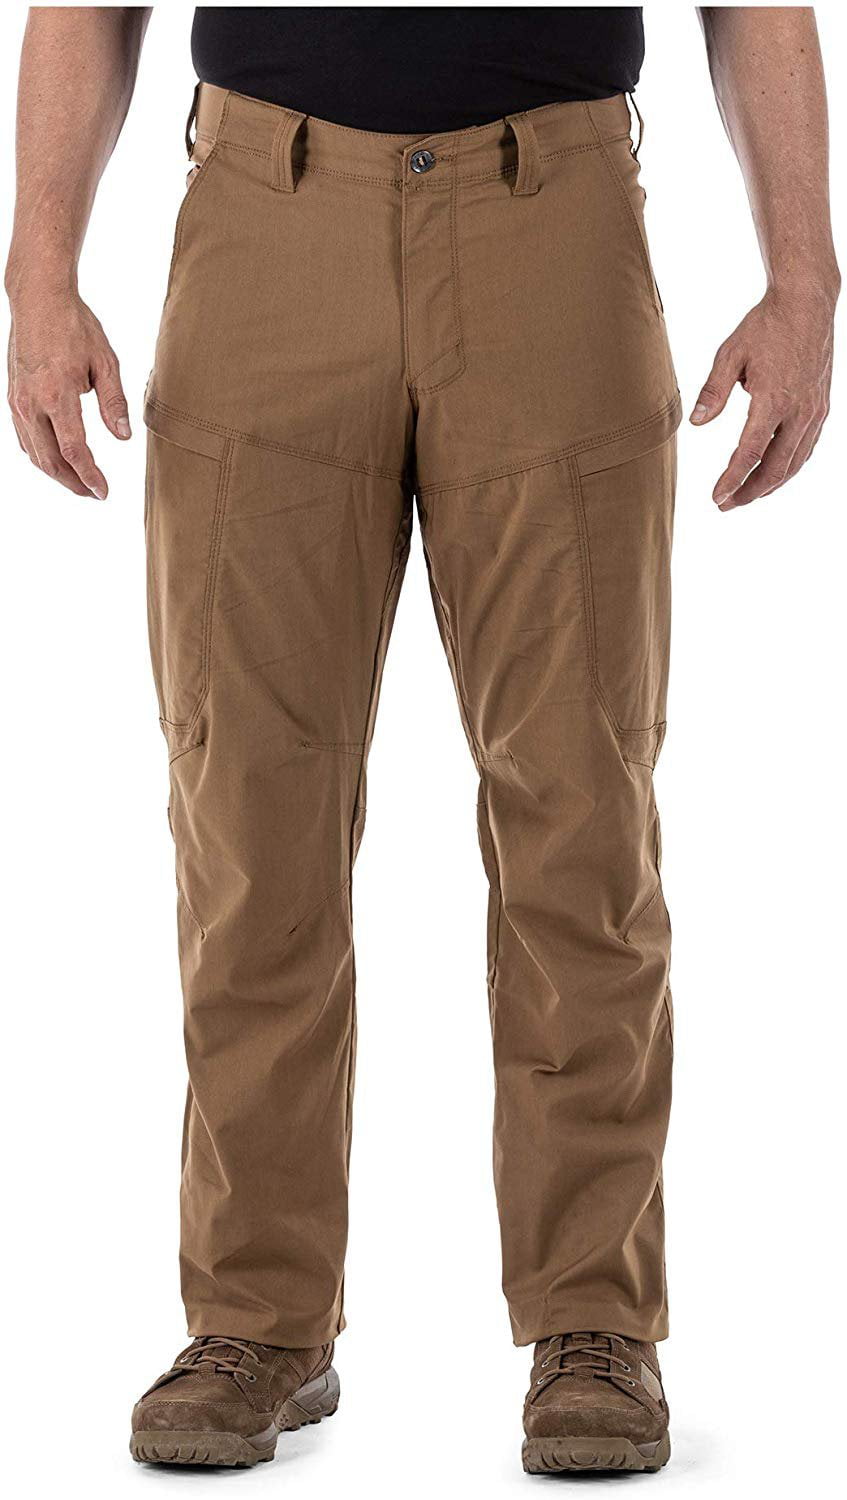 Gusseted Style 74434 5.11 Tactical Men's Apex Cargo Work Pants Flex-Tac Stretch Fabric Teflon Finish 